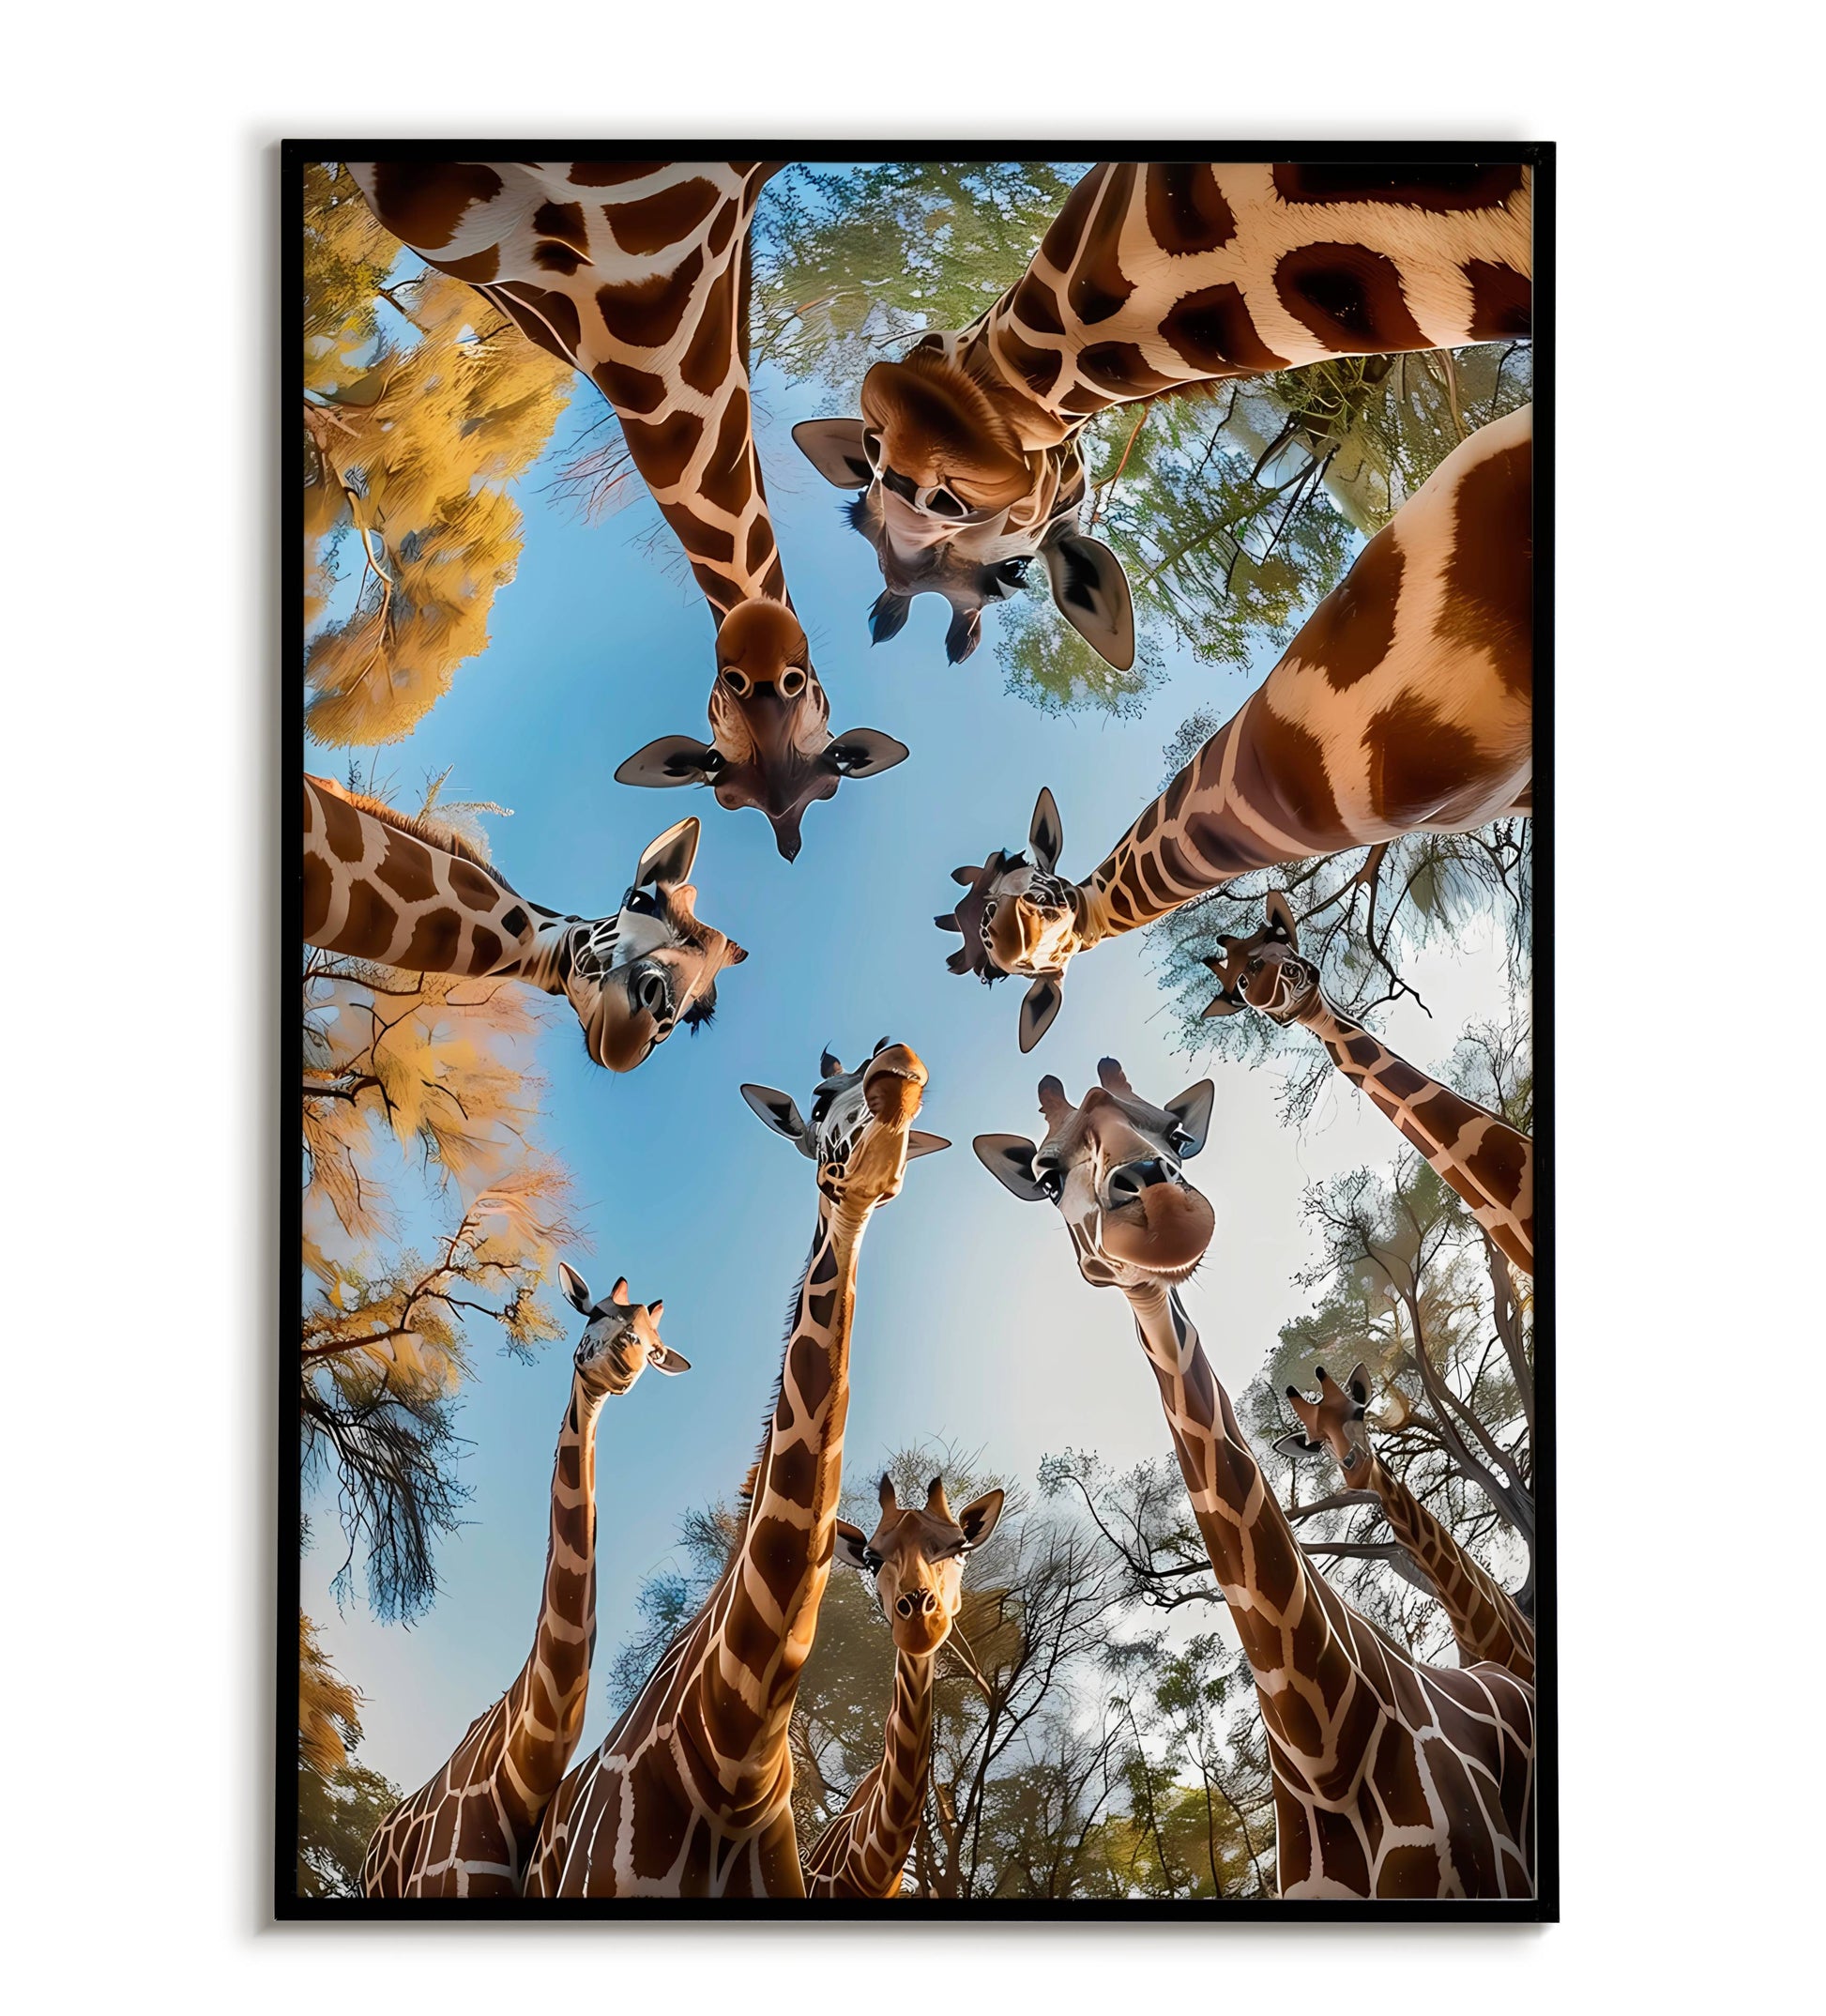 Giraffe Gaze printable poster. Available for purchase as a physical poster or digital download